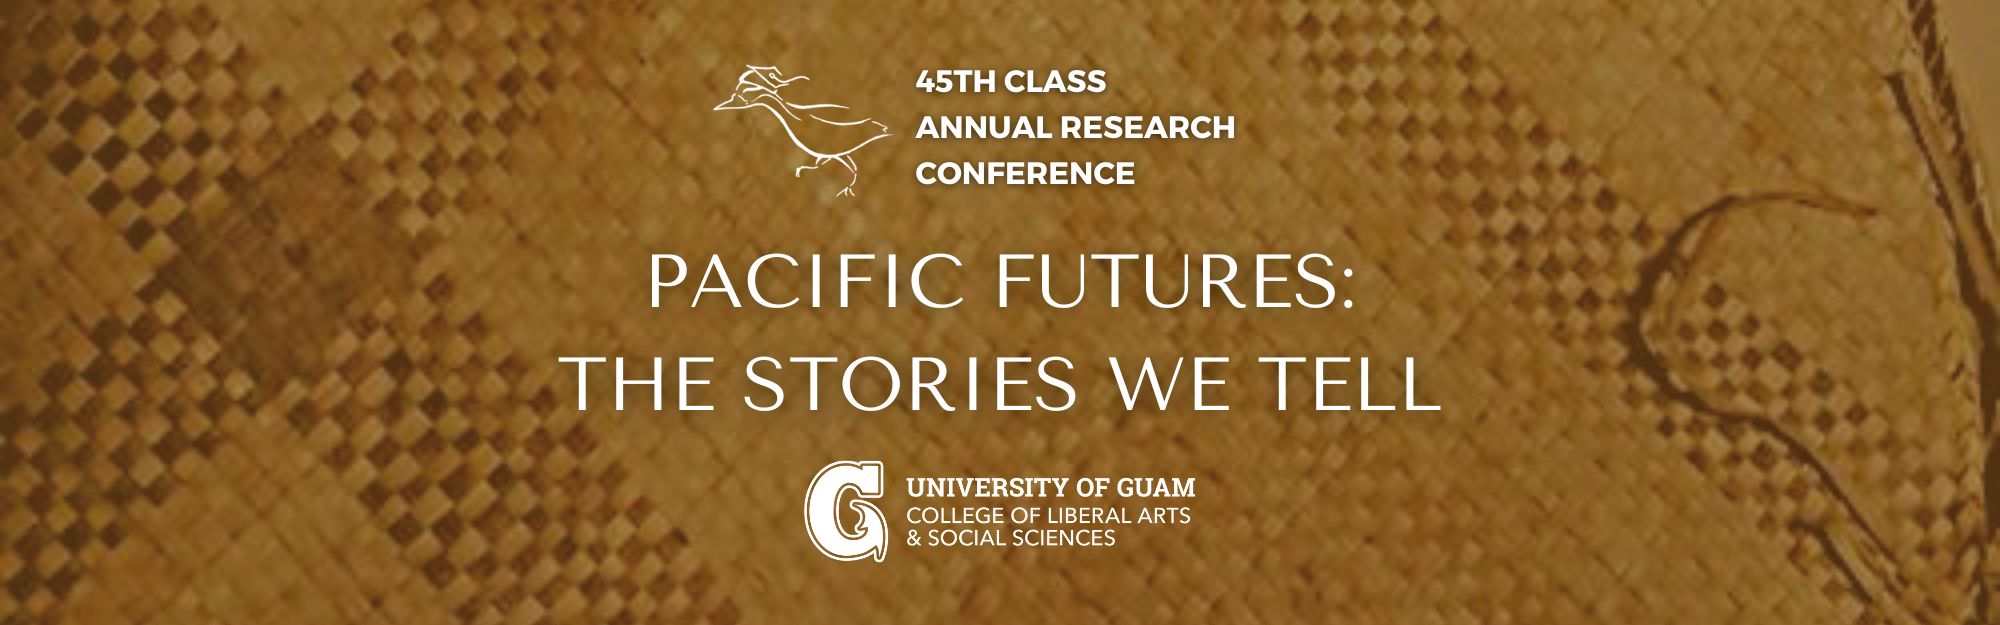 The University of Guam College of Liberal Arts and Social Science (CLASS) is hosting the 45th Annual Research Conference, an explorative and imaginative conference highlighting the relationship between narratives and future possibilities.